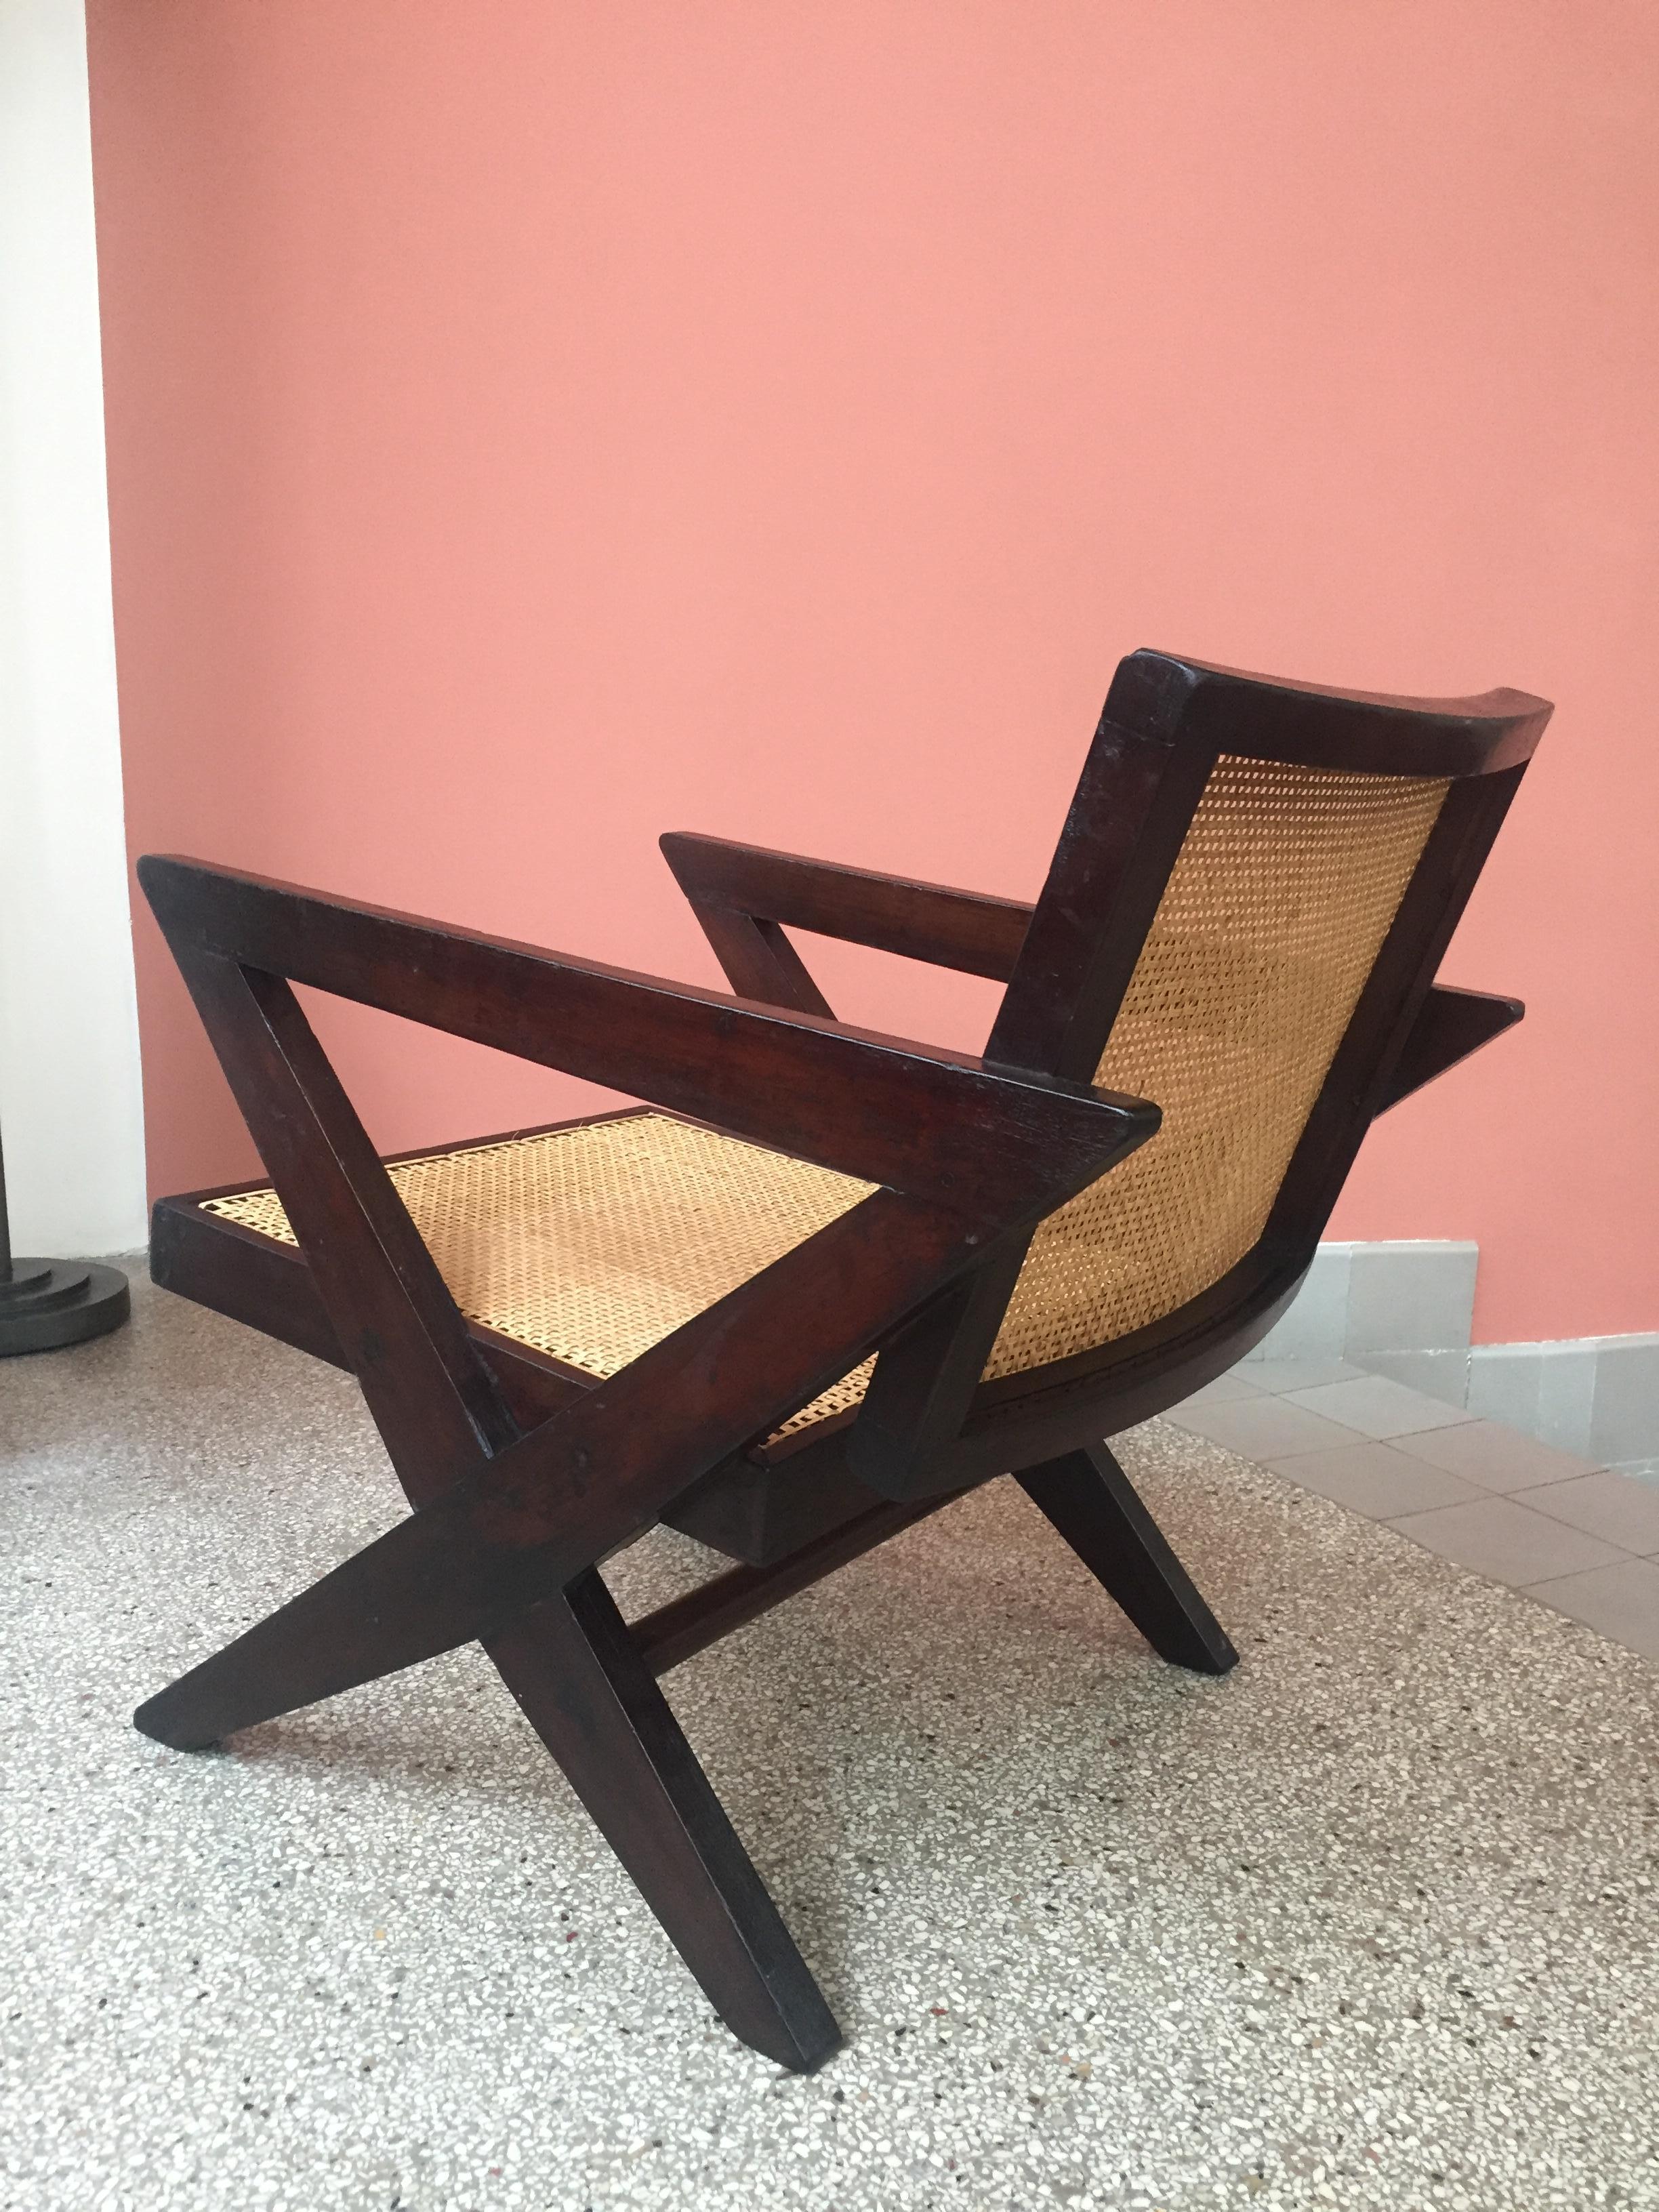 Indian Pierre Jeanneret, Cross Easy Chair, circa 1956